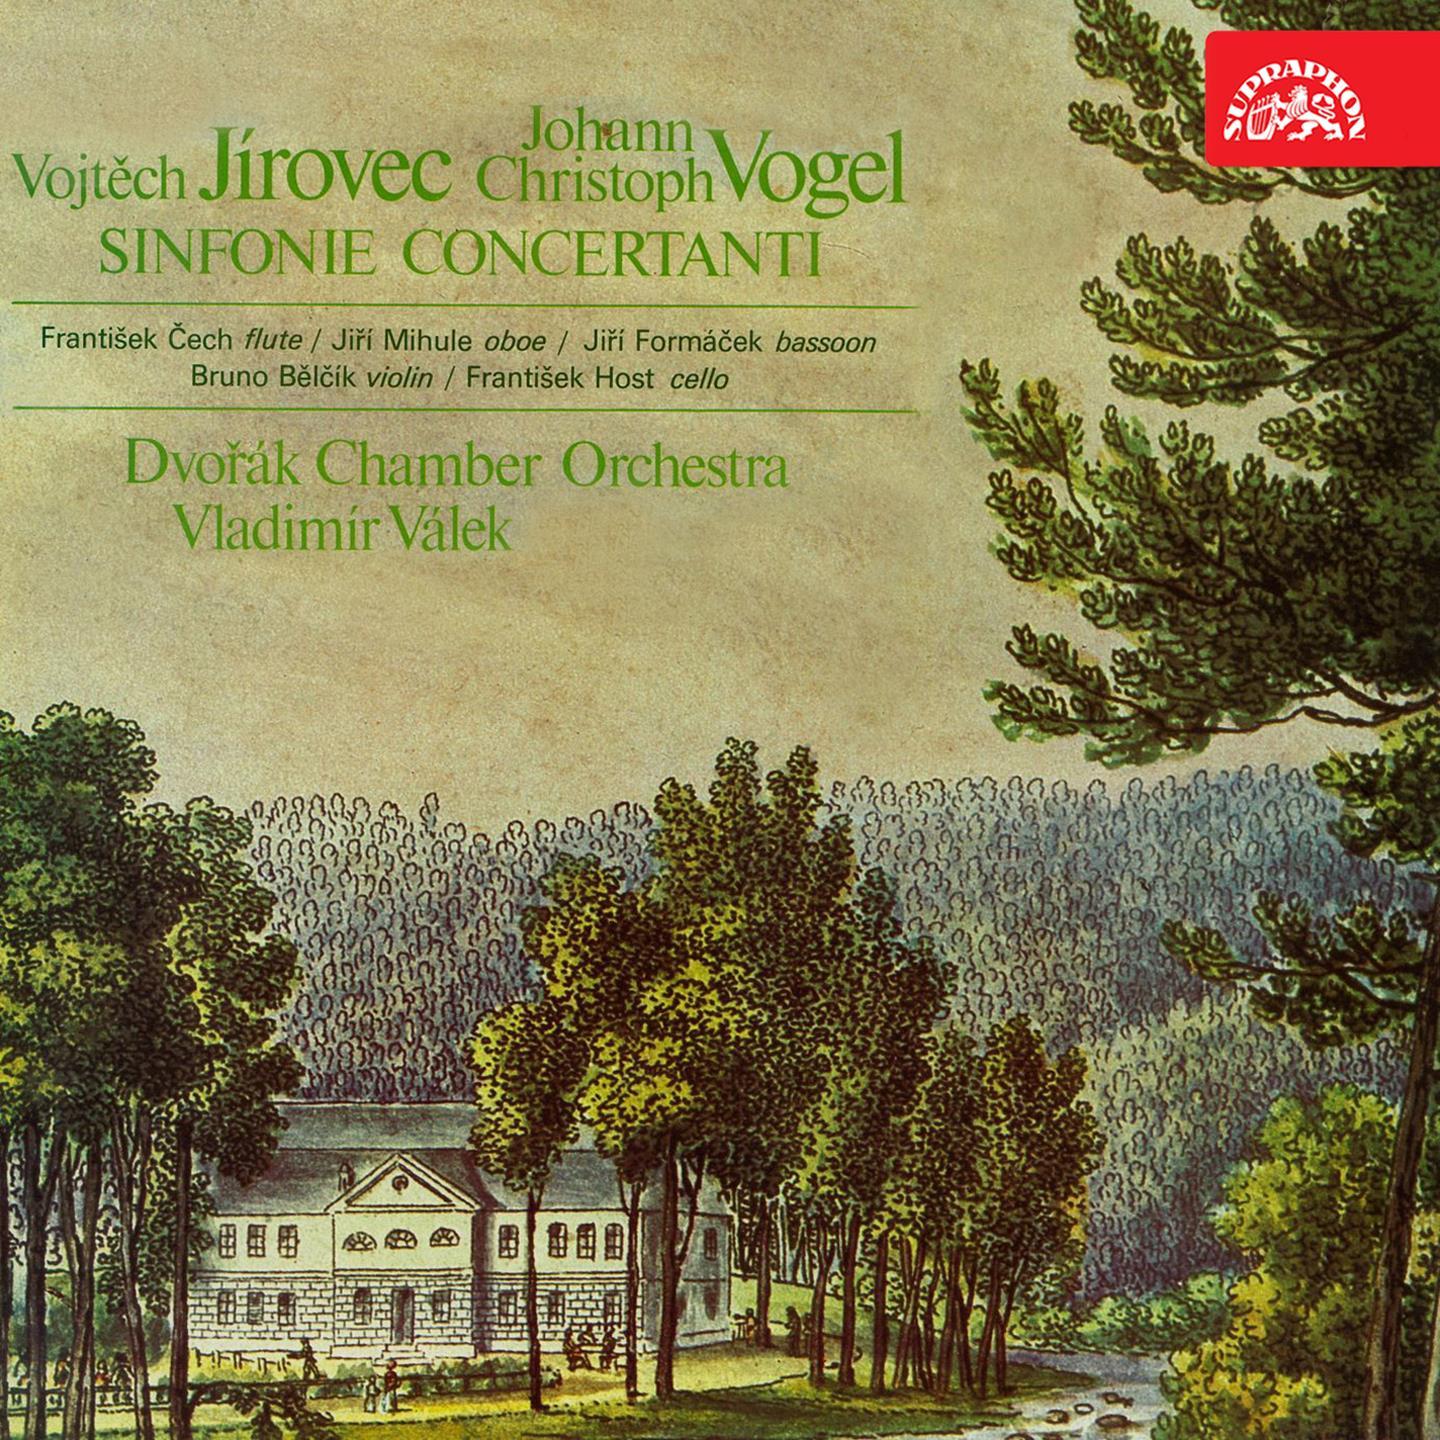 Sinfonia concertante for Oboe, Bassoon and Orchestra in C Major: III. Rondo